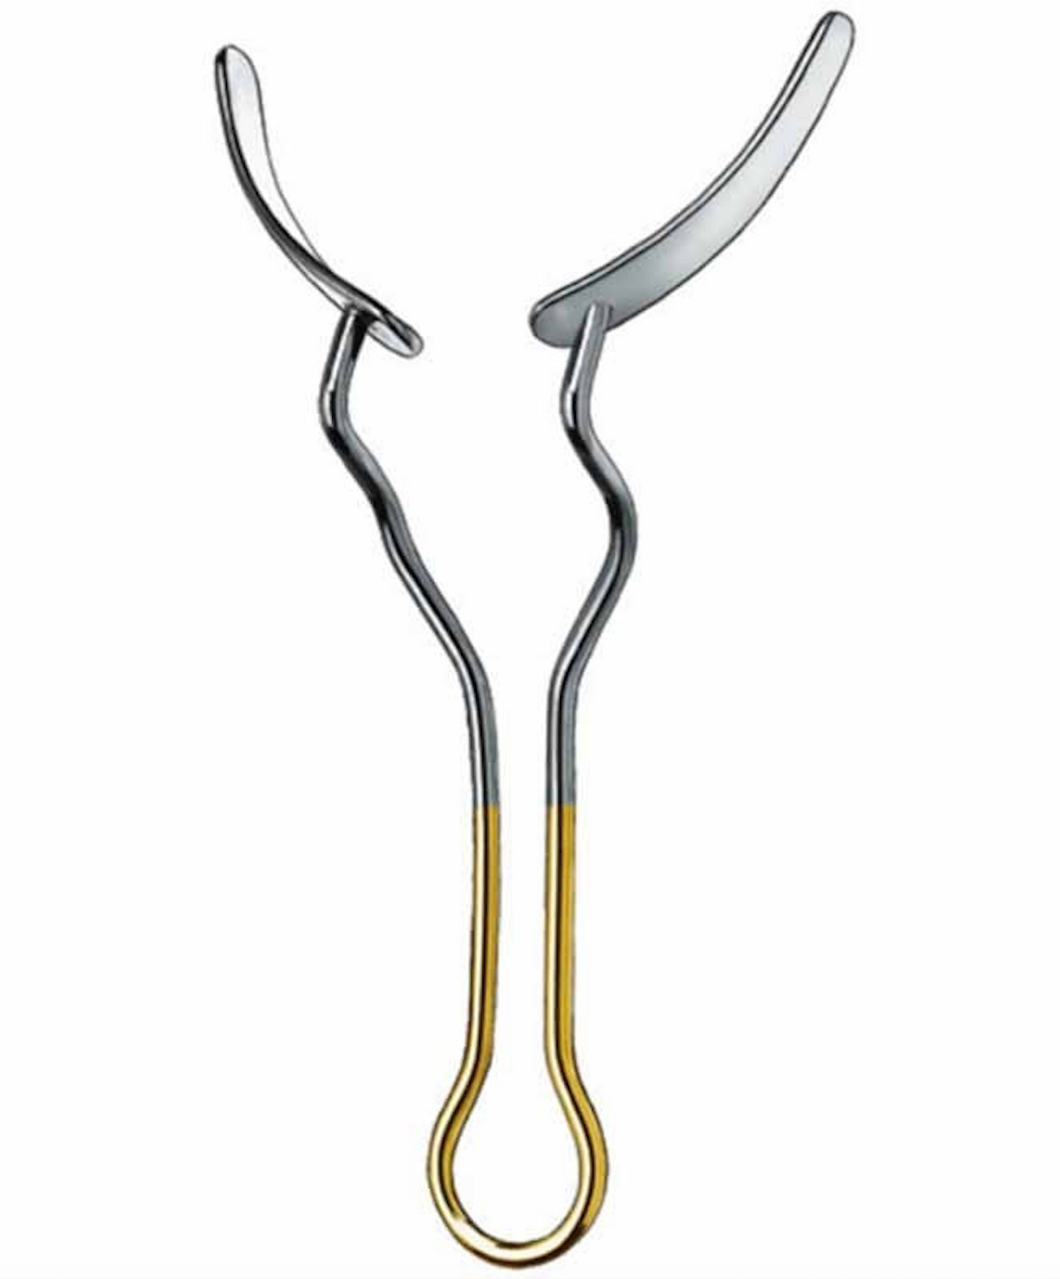 Maty Cheek Retractor is used to hold mucoperiosteal flaps, cheeks, lips away from the surgical area.